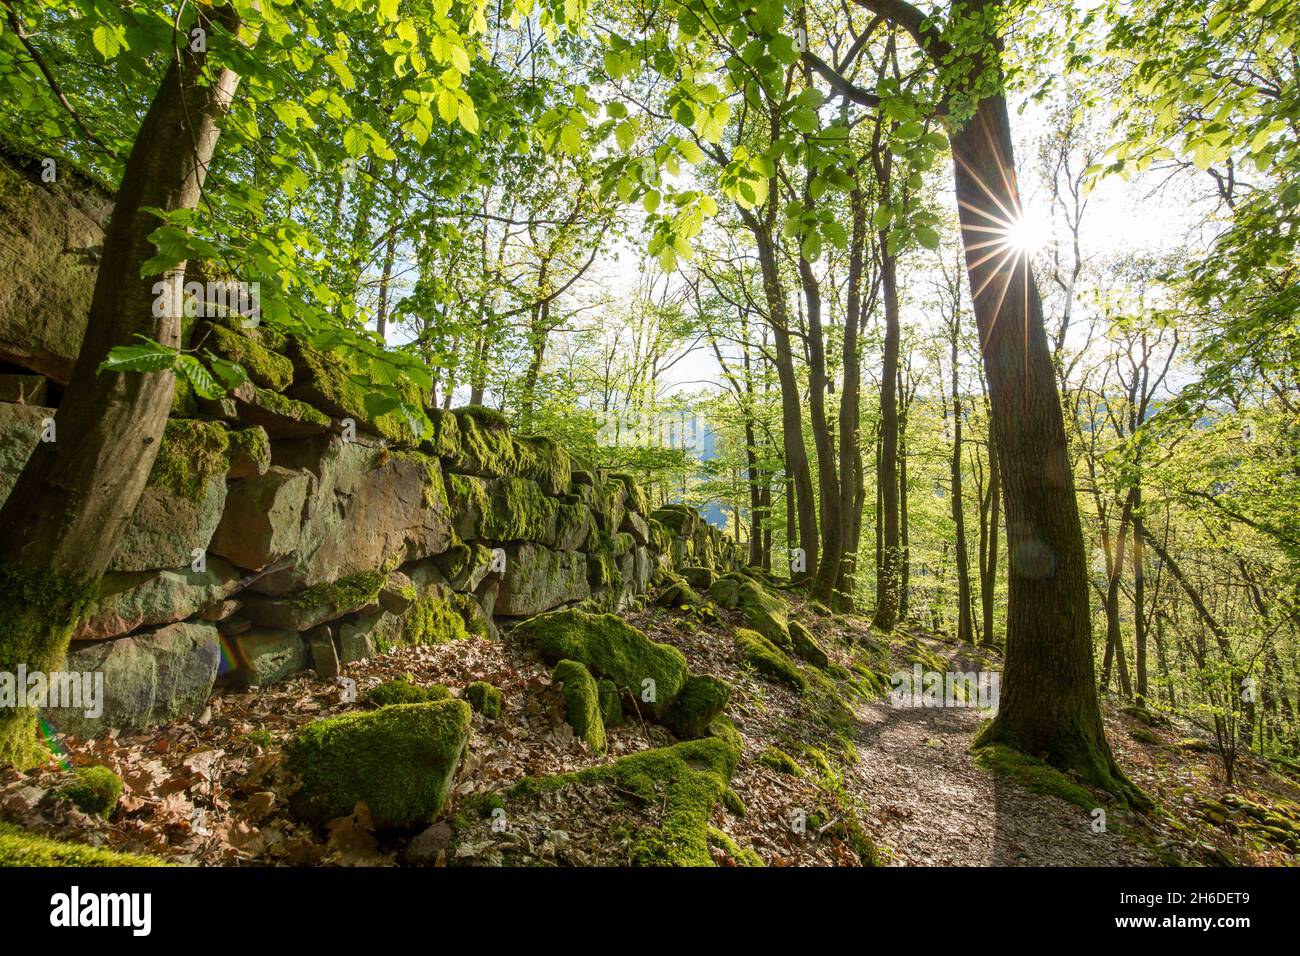 common beech (Fagus sylvatica), hiking trail along a dry stone wall, Tree of the year 2022, Germany, Odenwald Stock Photo